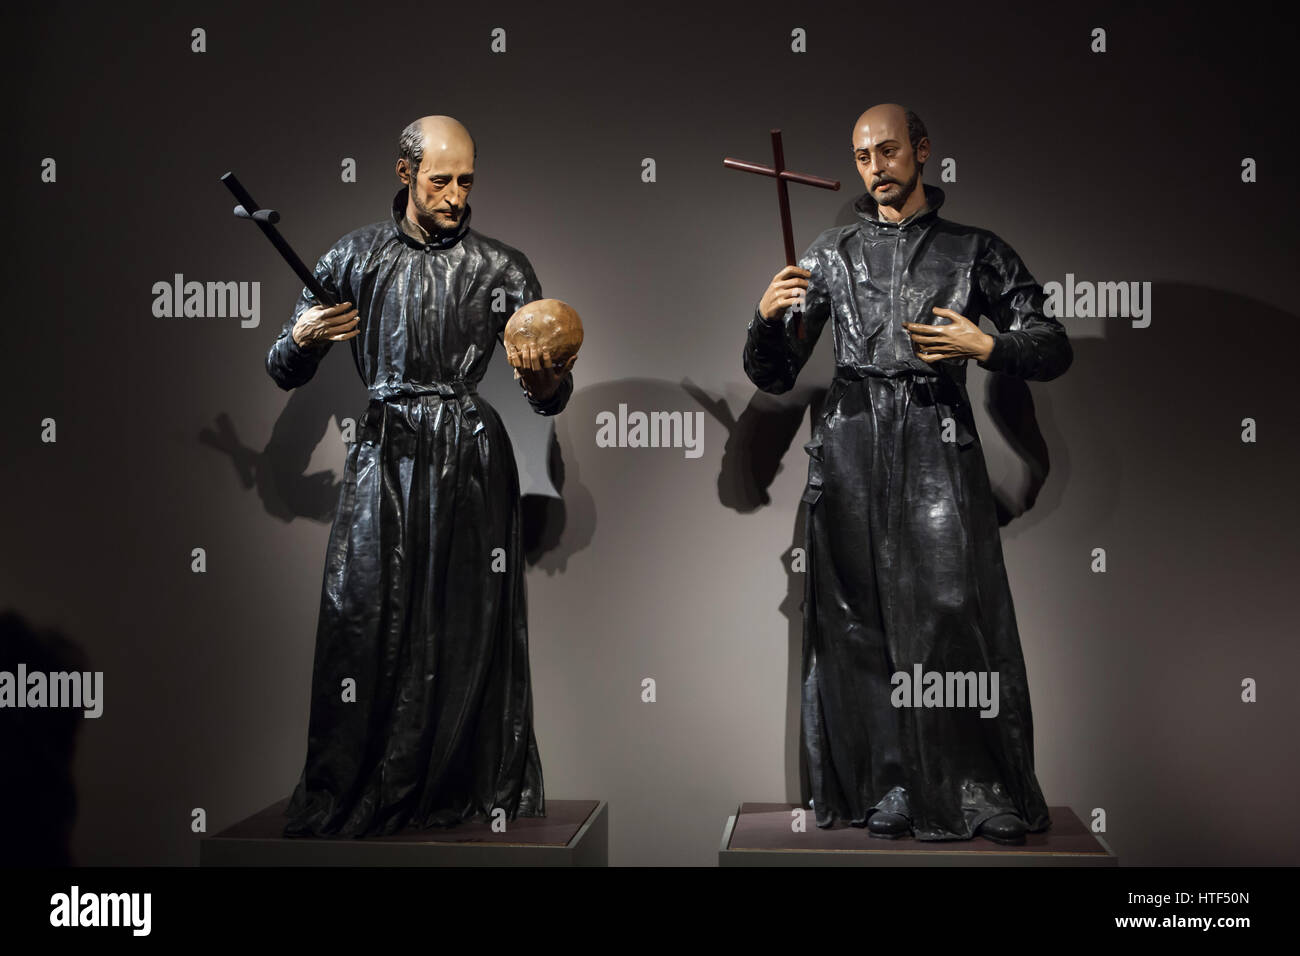 Saint Francis Borgia (L) and Saint Ignatius of Loyola (R). Polychrome wooden statues by Spanish Baroque sculptor Juan Martinez Montanes (1624) on display at the exhibition in the Kunsthalle Munchen in Munich, Bavaria, Germany. The exhibition devoted to the Spanish Golden Age runs till 26 March 2017. Stock Photo